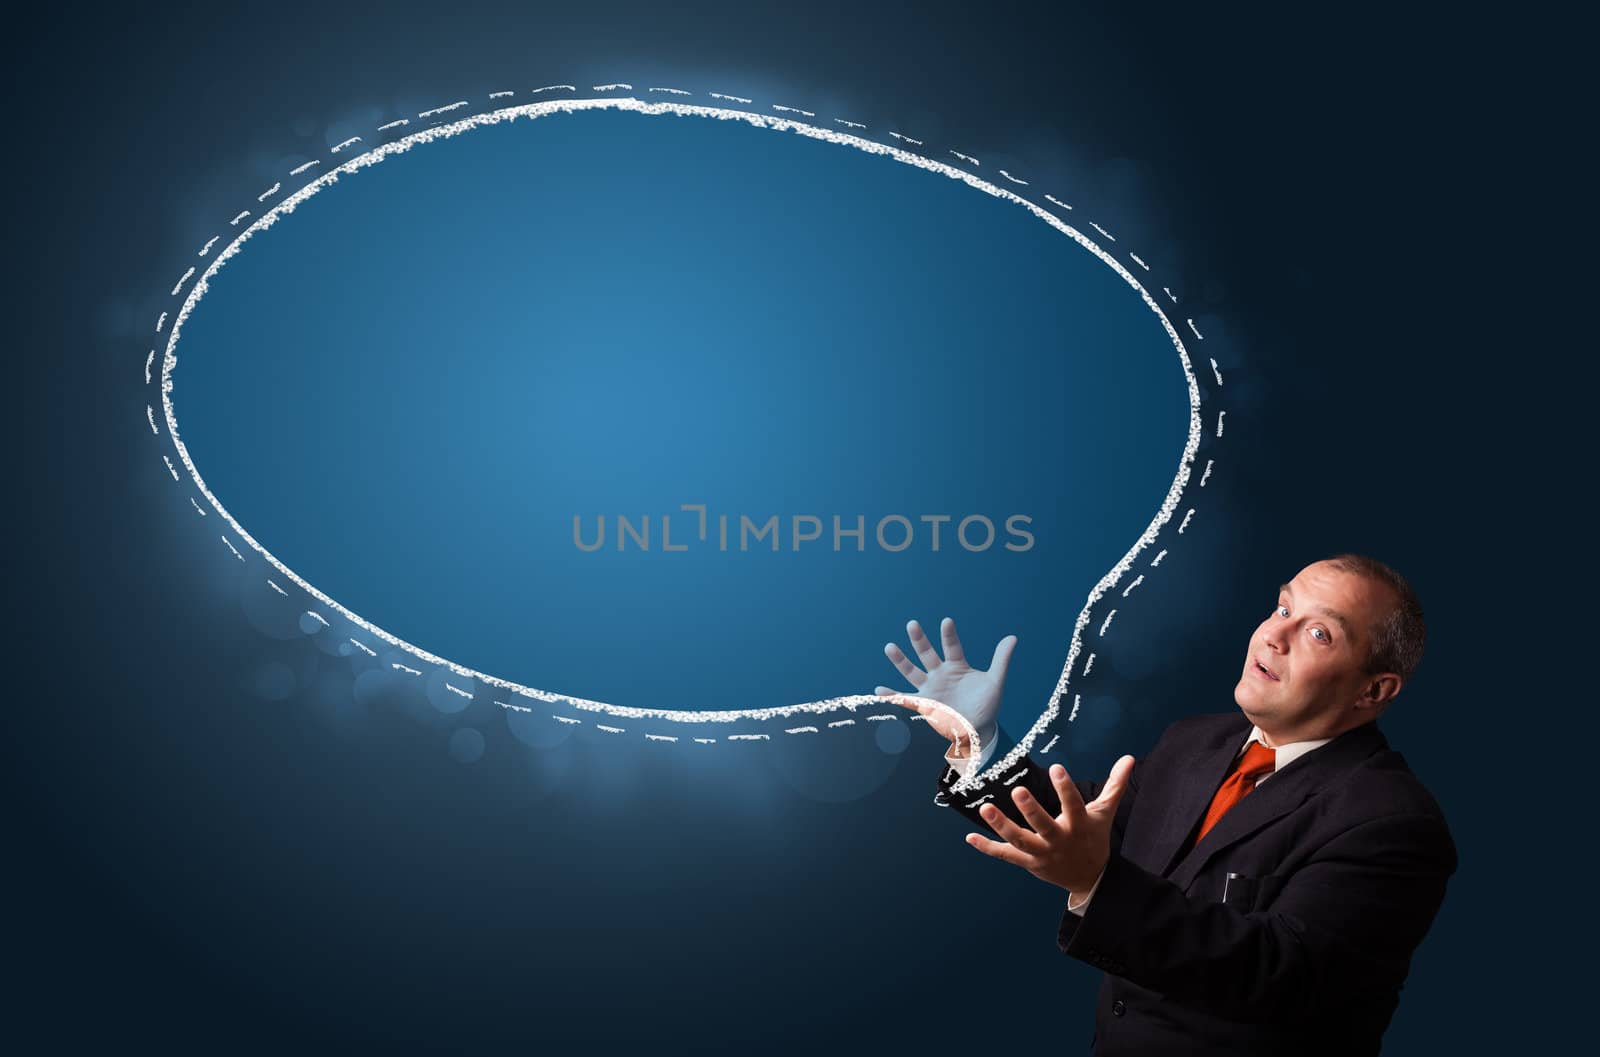 funny businessman in suit presenting speech bubble copy space